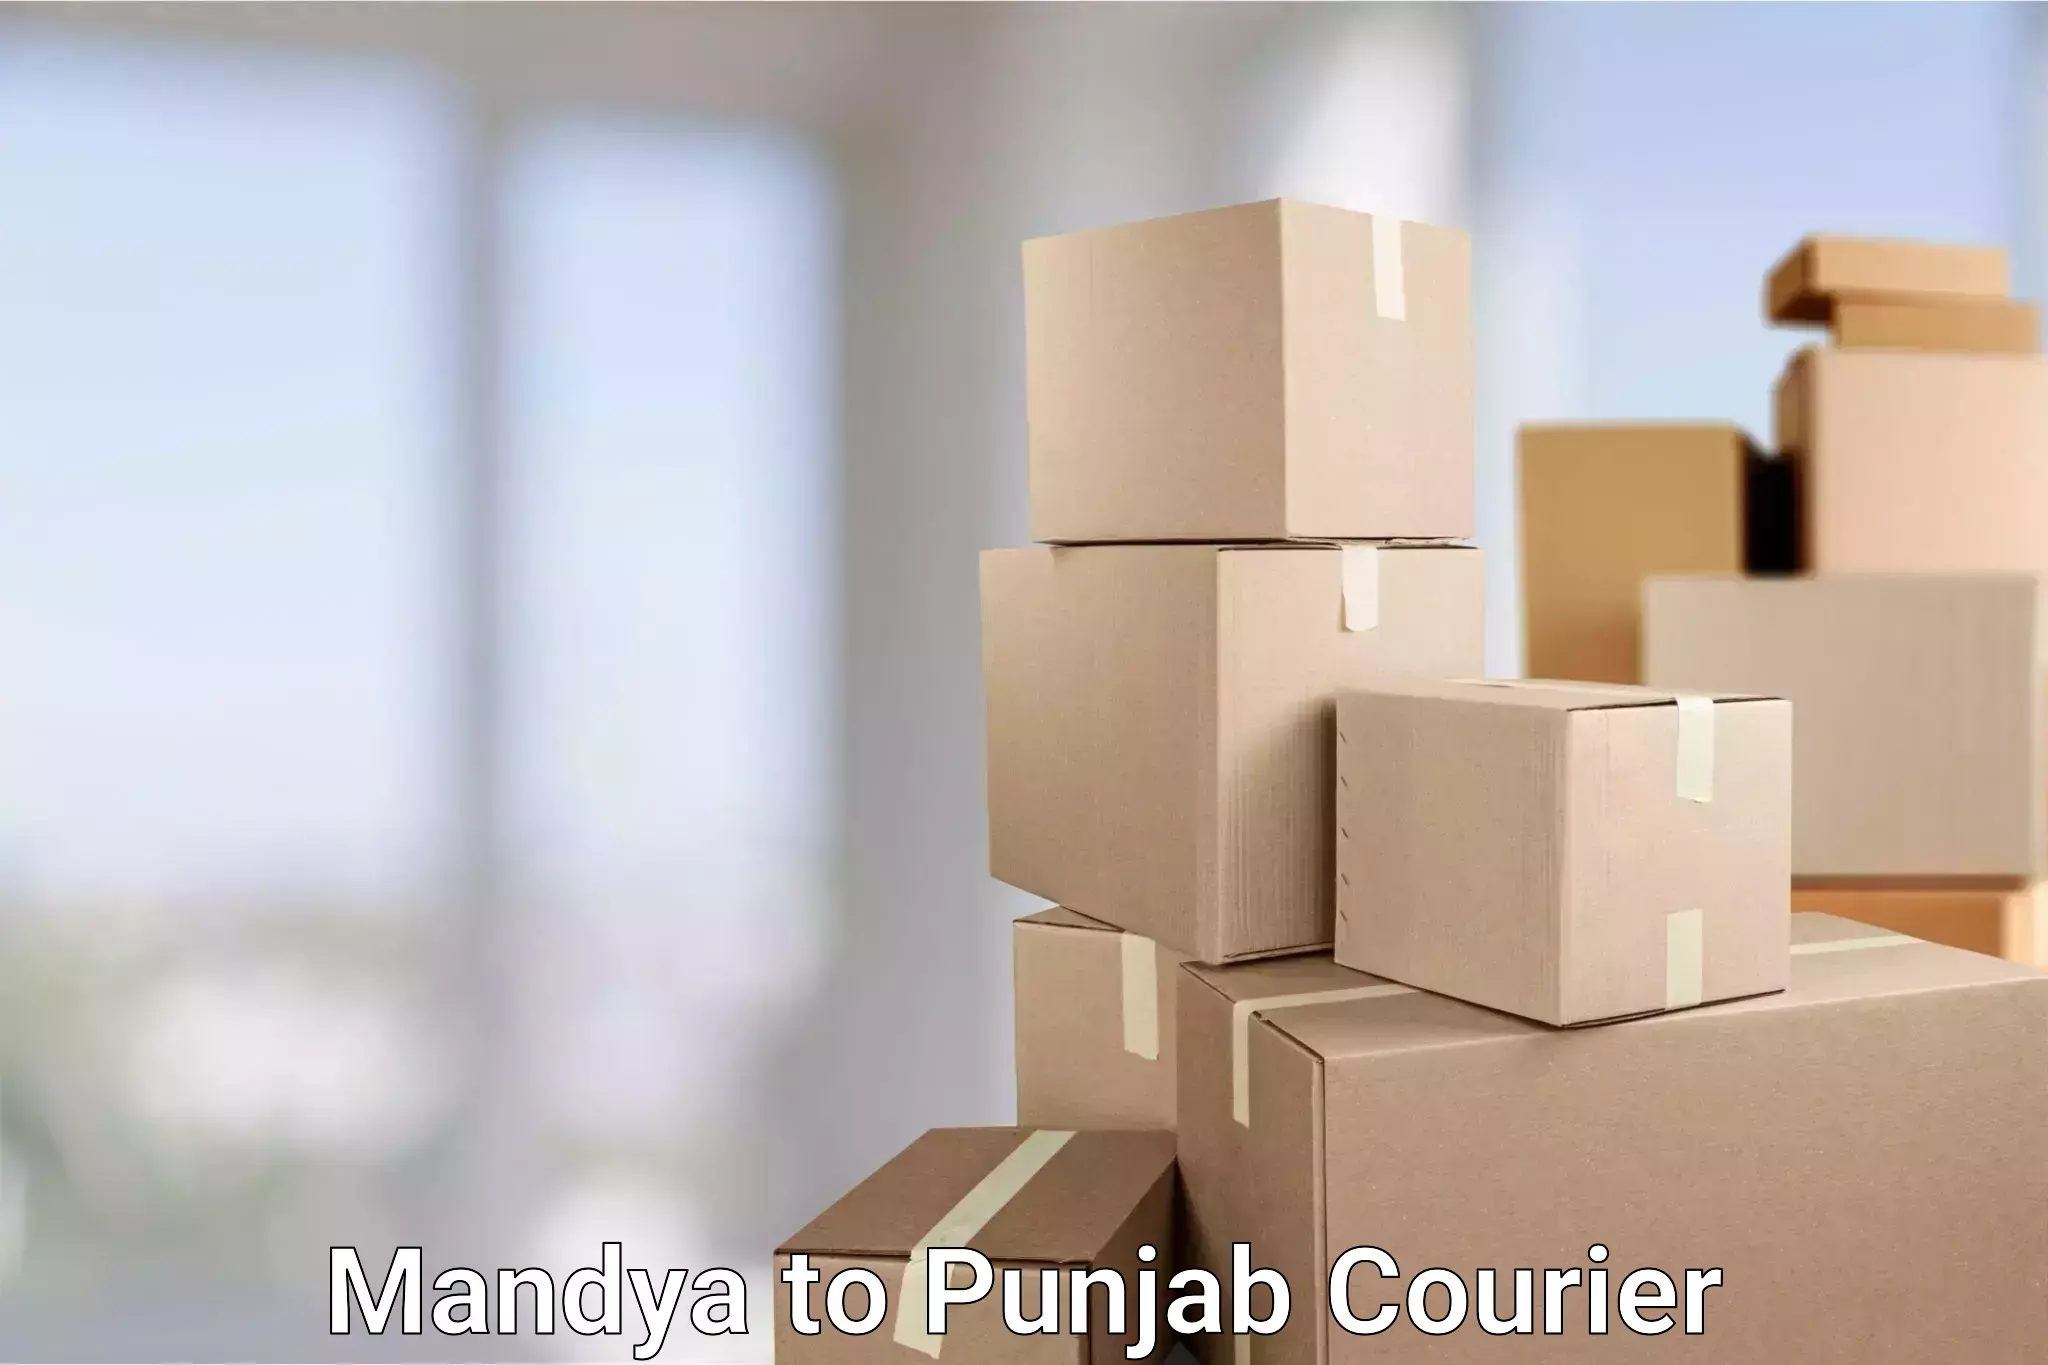 Efficient package consolidation Mandya to Patiala